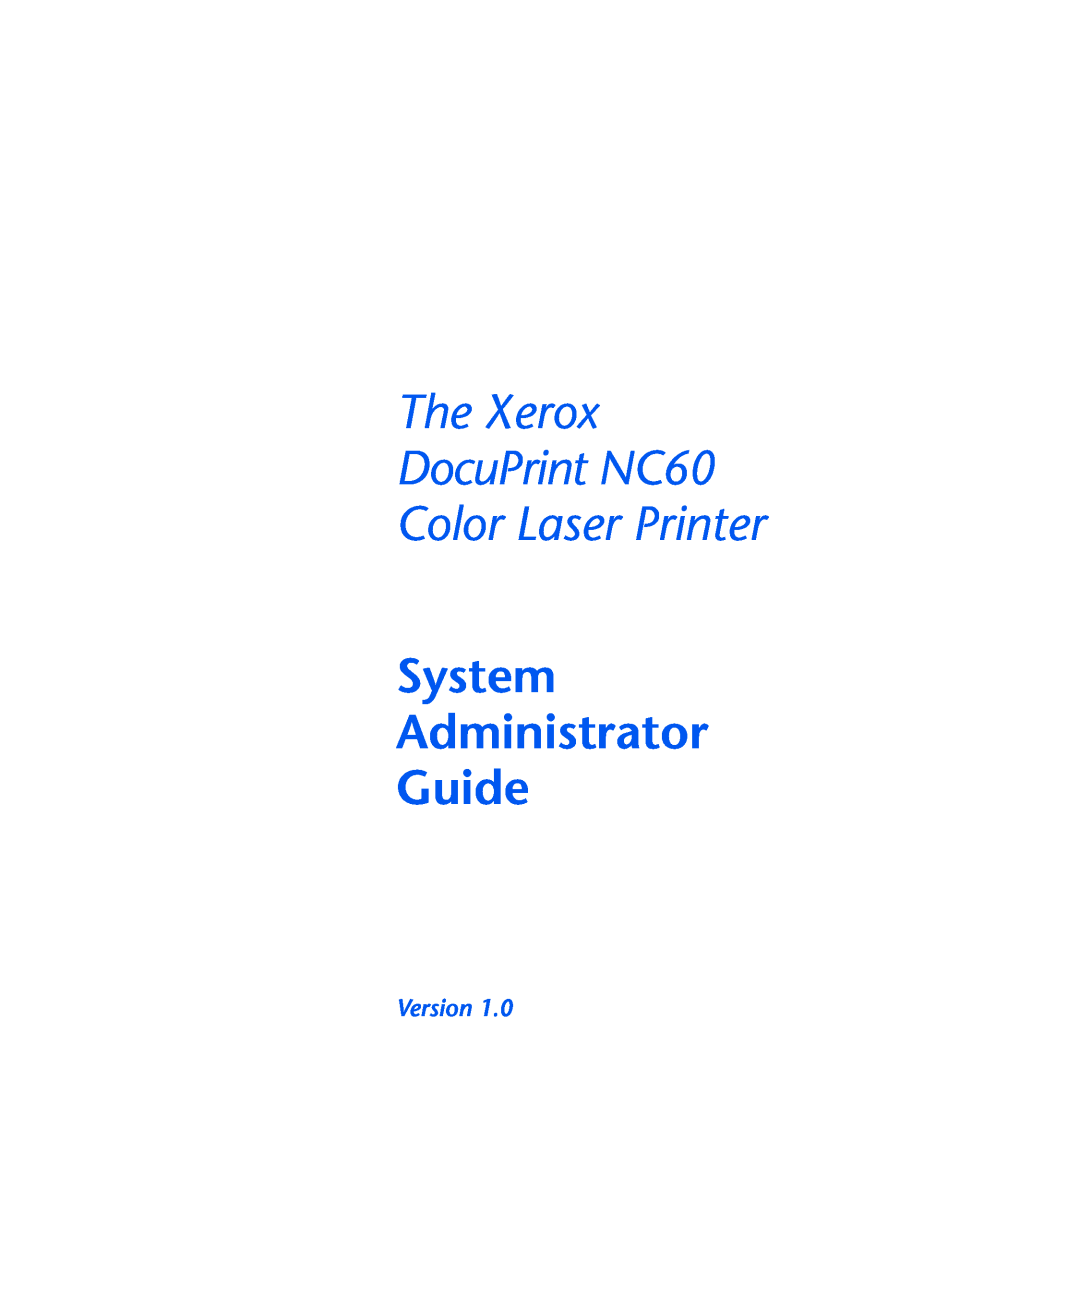 3D Innovations manual The Xerox DocuPrint NC60 Color Laser Printer, System Administrator Guide, Version 